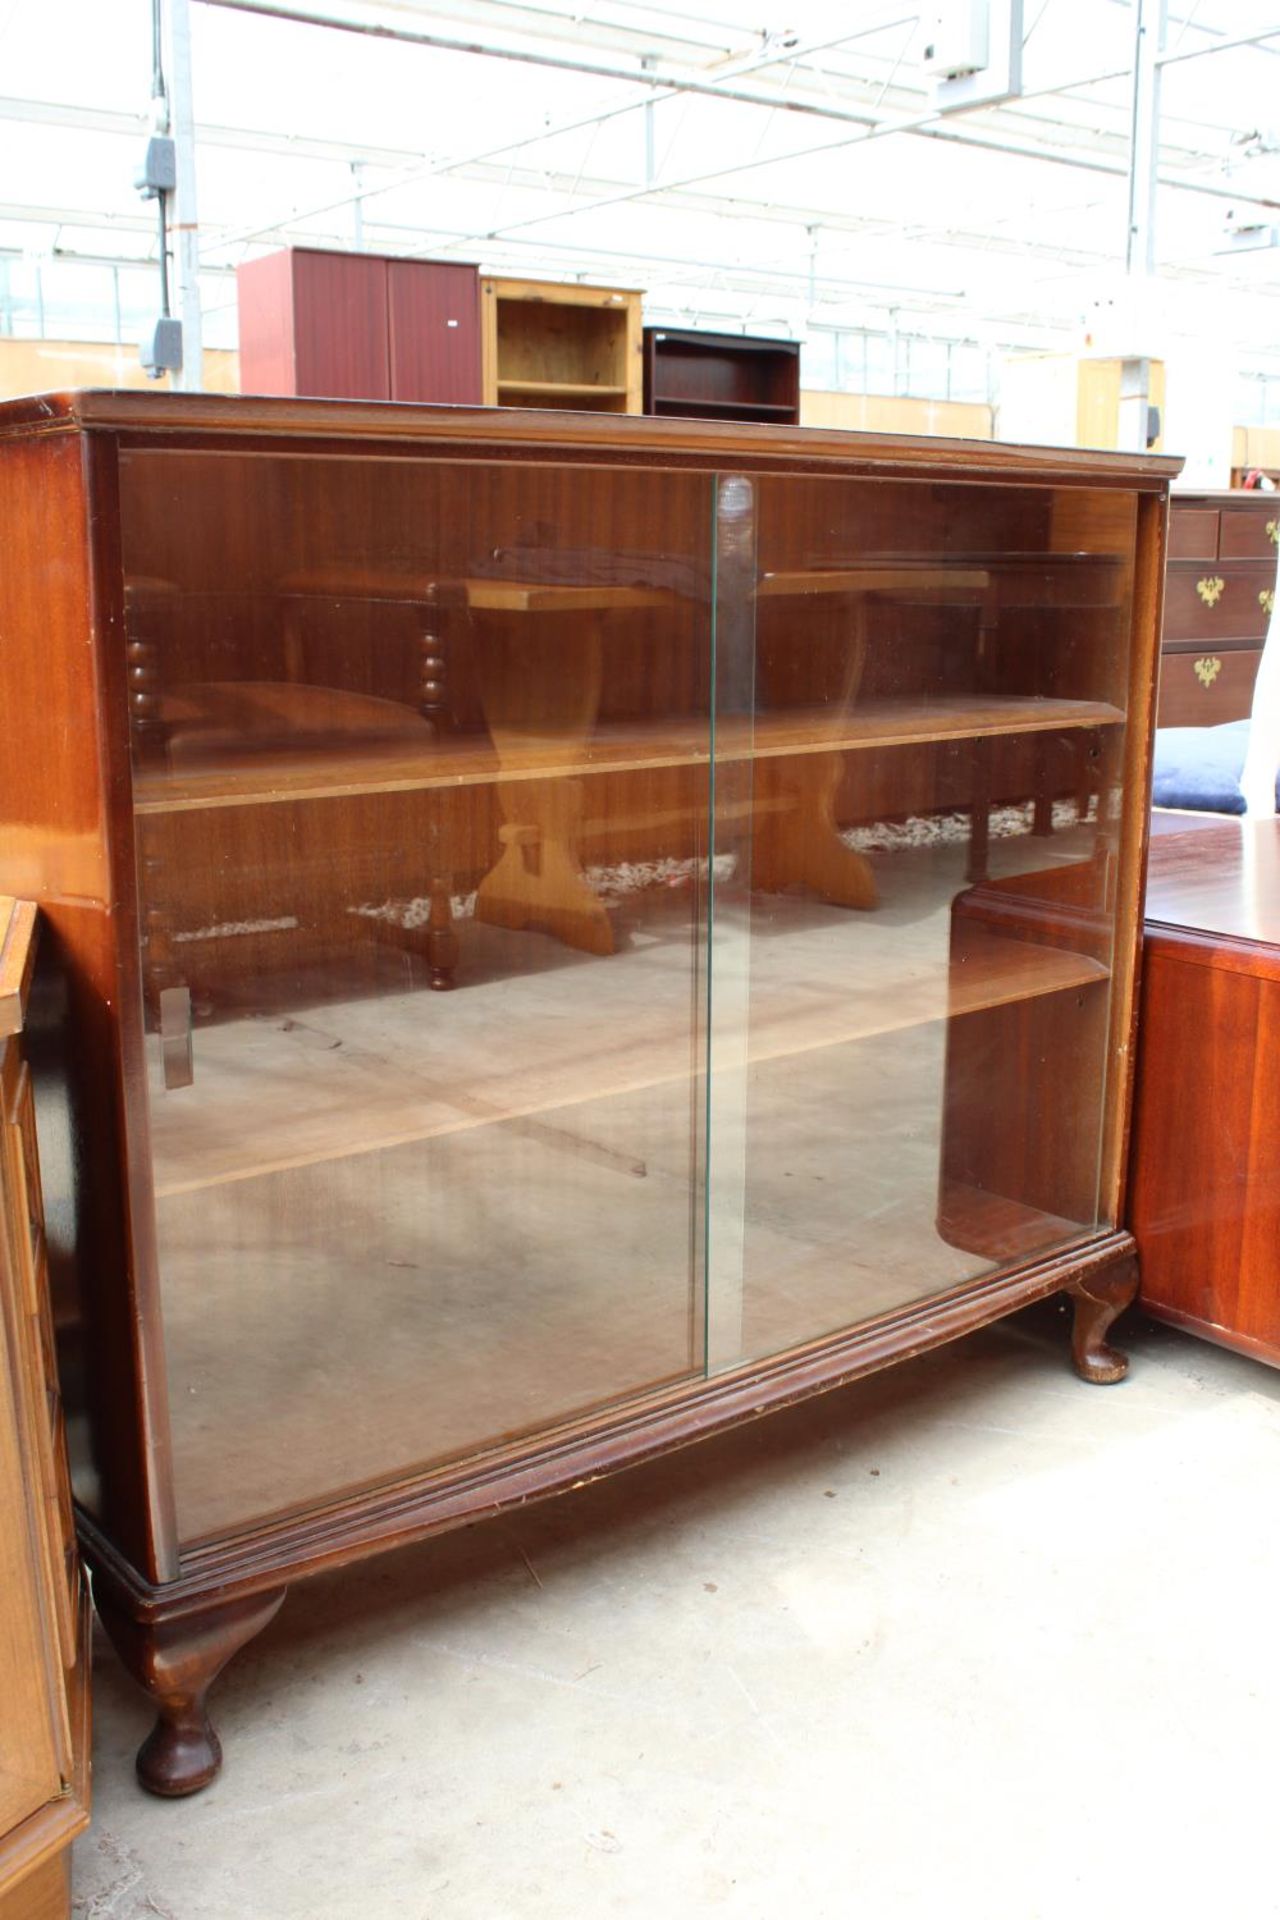 A MID 20TH CENTURY MAHOGANY BOOKCASE WITH 2 GLASS SLIDING DOORS ON CABRIOLE LEGS, 39" WIDE - Image 2 of 3